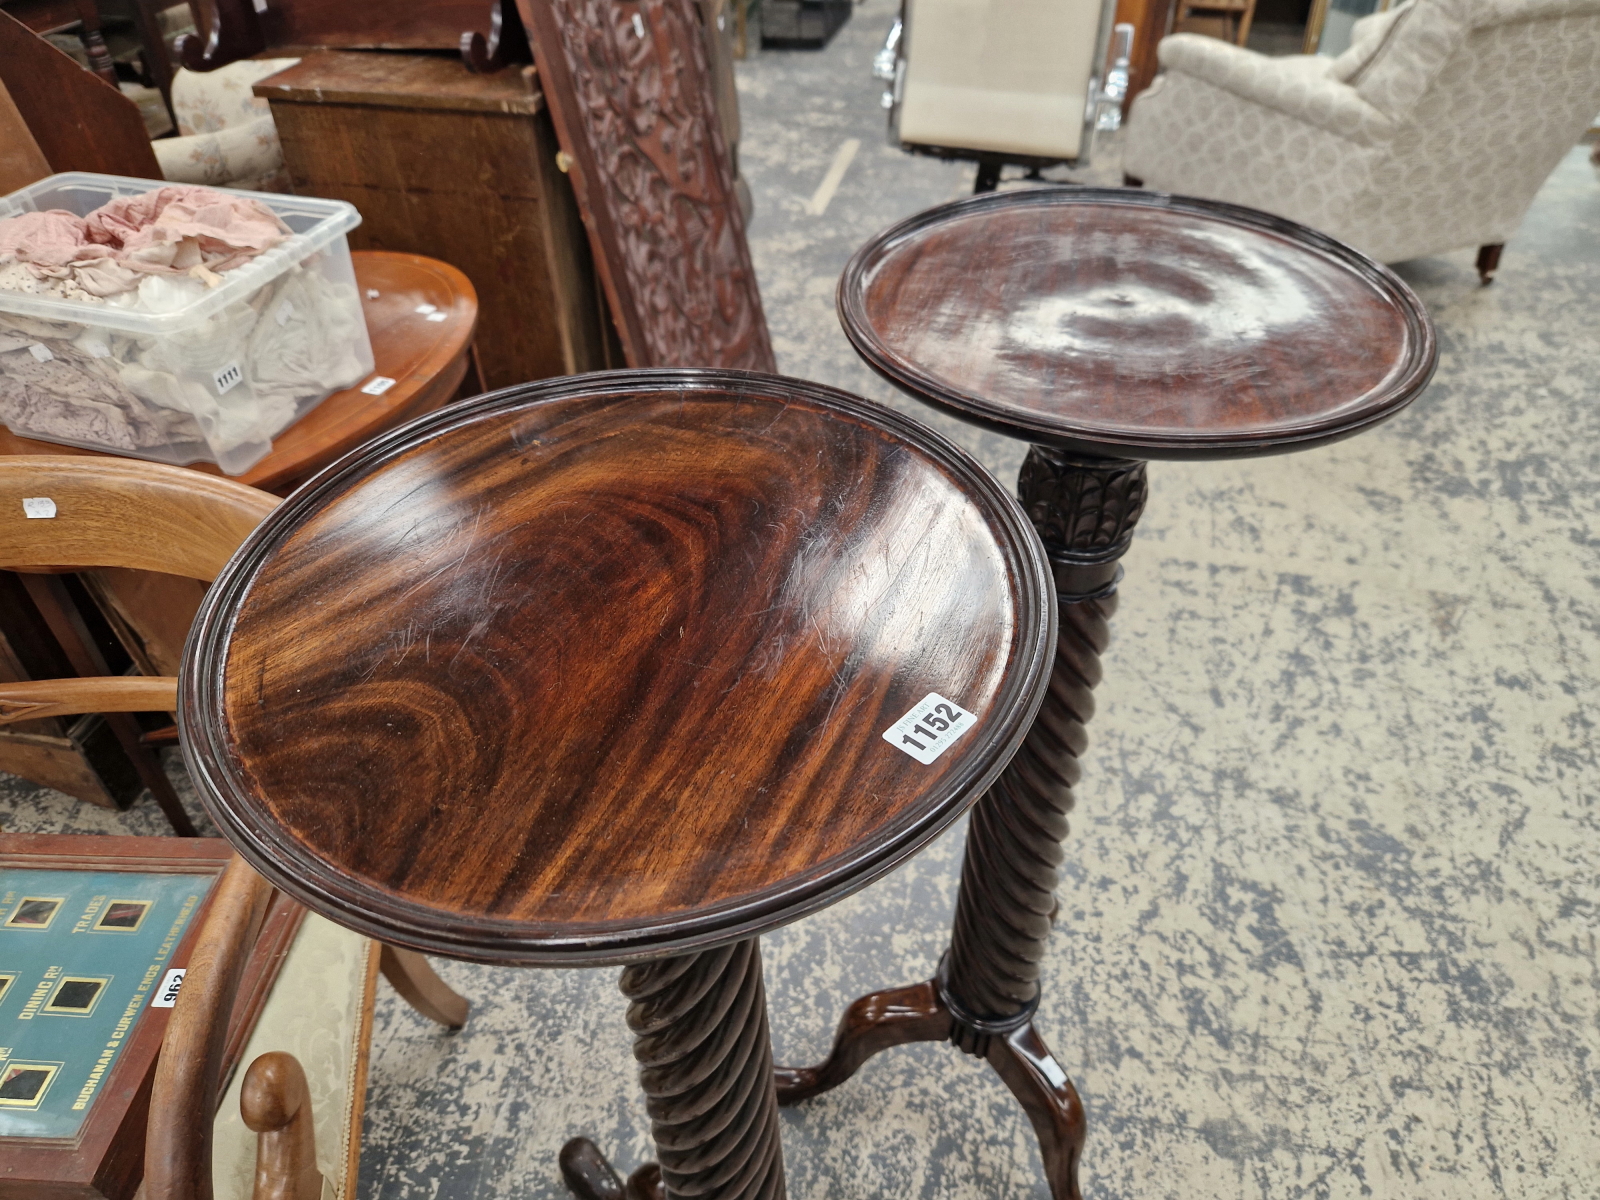 A PAIR OF MAHOGANY TORCHERES, THE DISHED CIRCULAR TOPS ON SPIRAL TWIST COLUMNS AND TRIPODS - Image 5 of 7